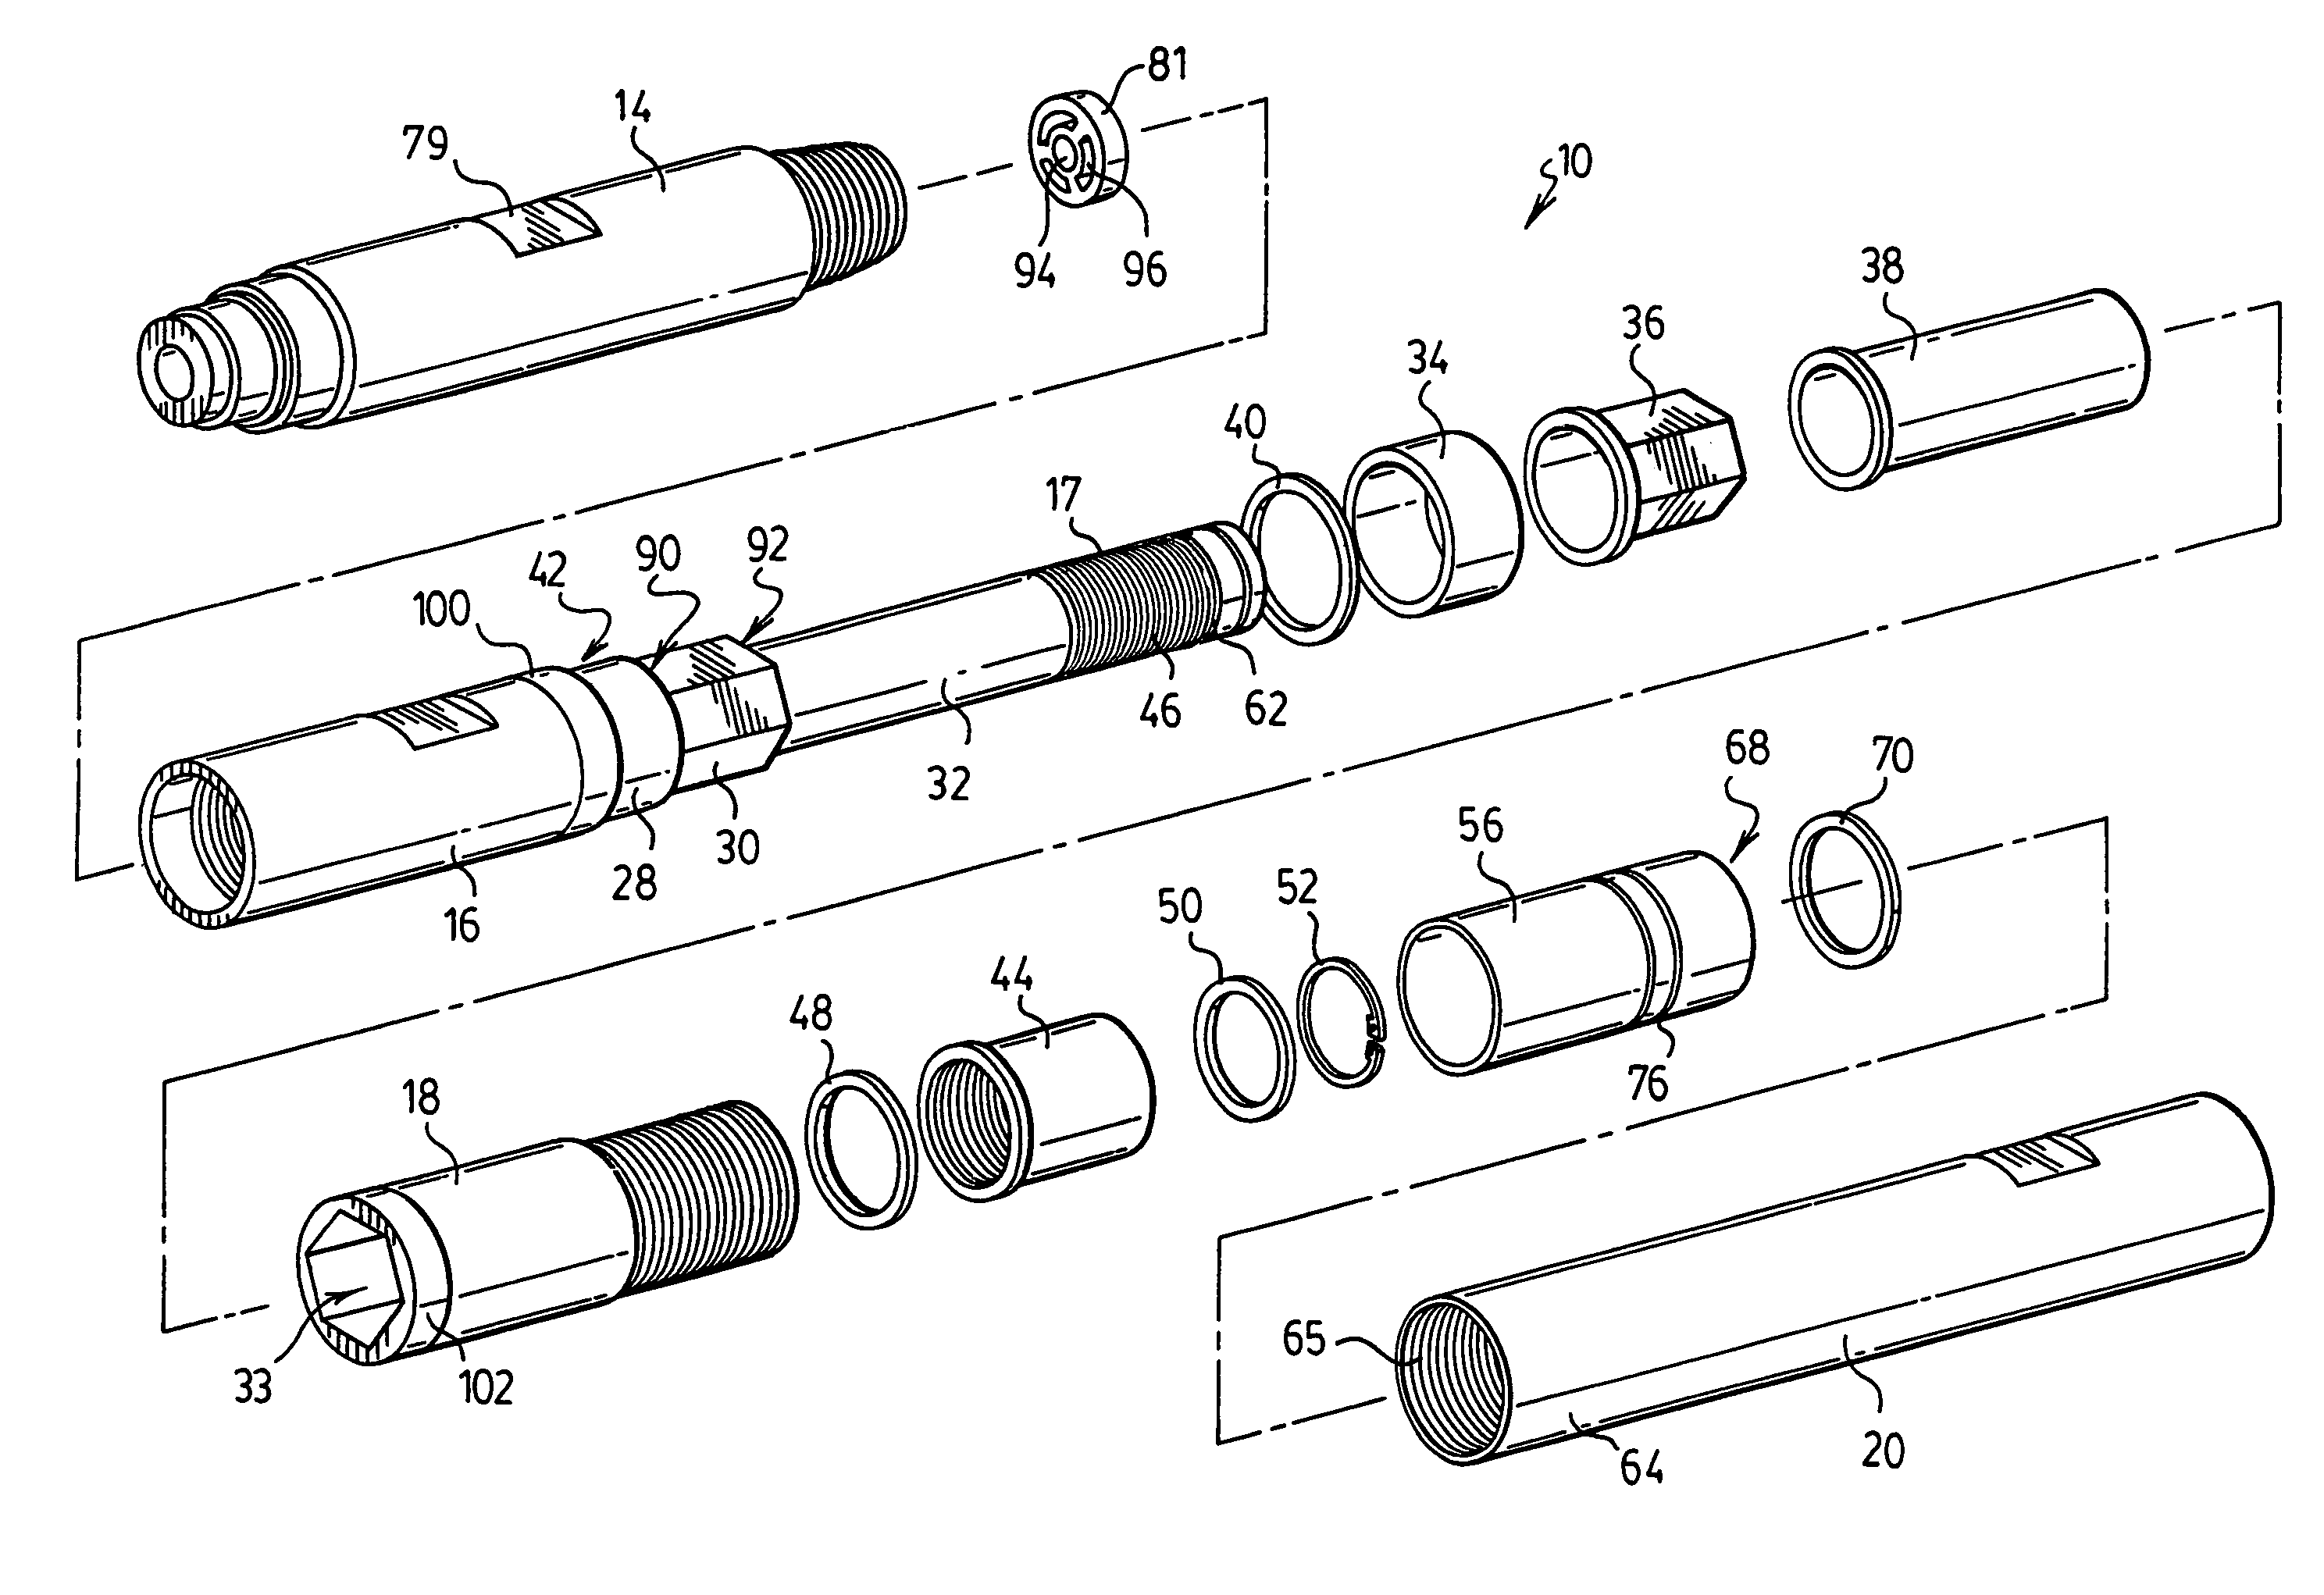 Electrical isolation connector subassembly for use in directional drilling